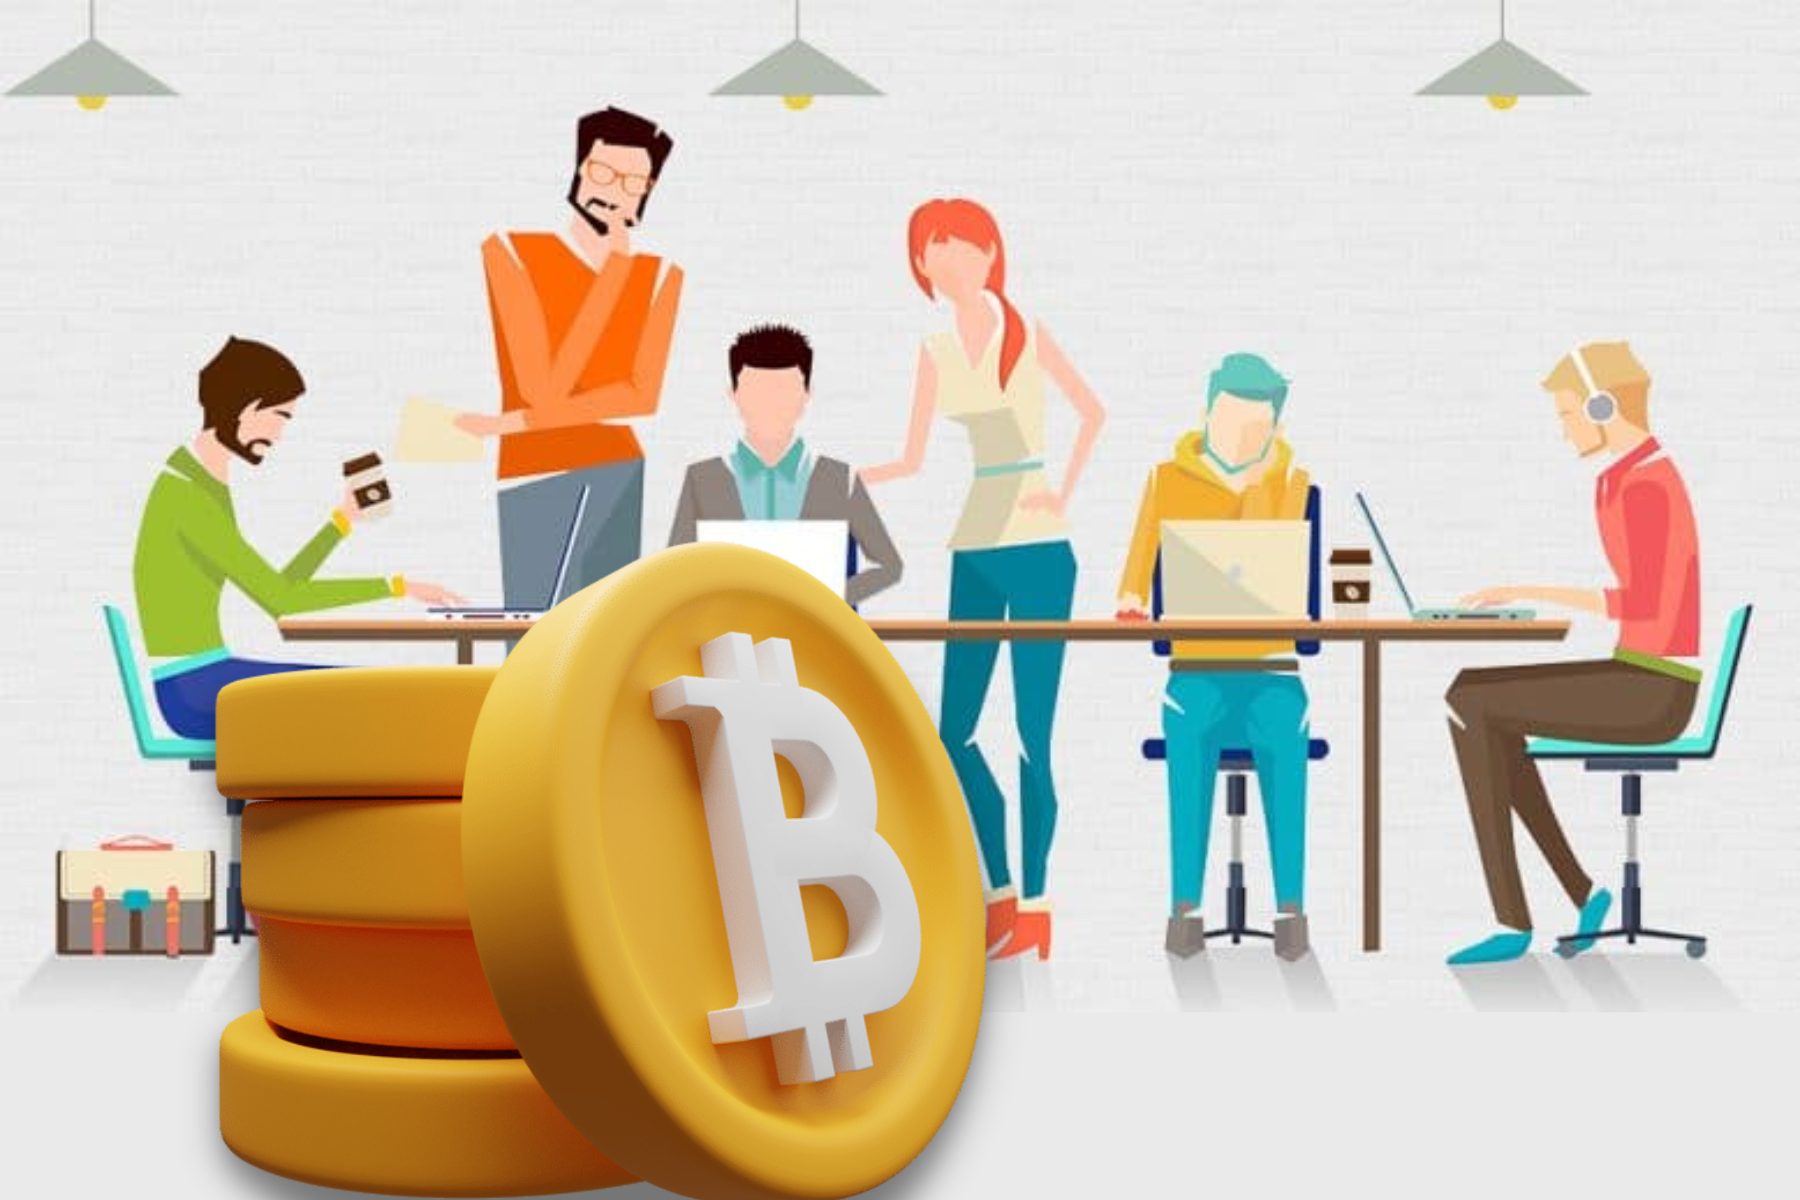 Several people assessing one another while standing on a large pile of Bitcoins